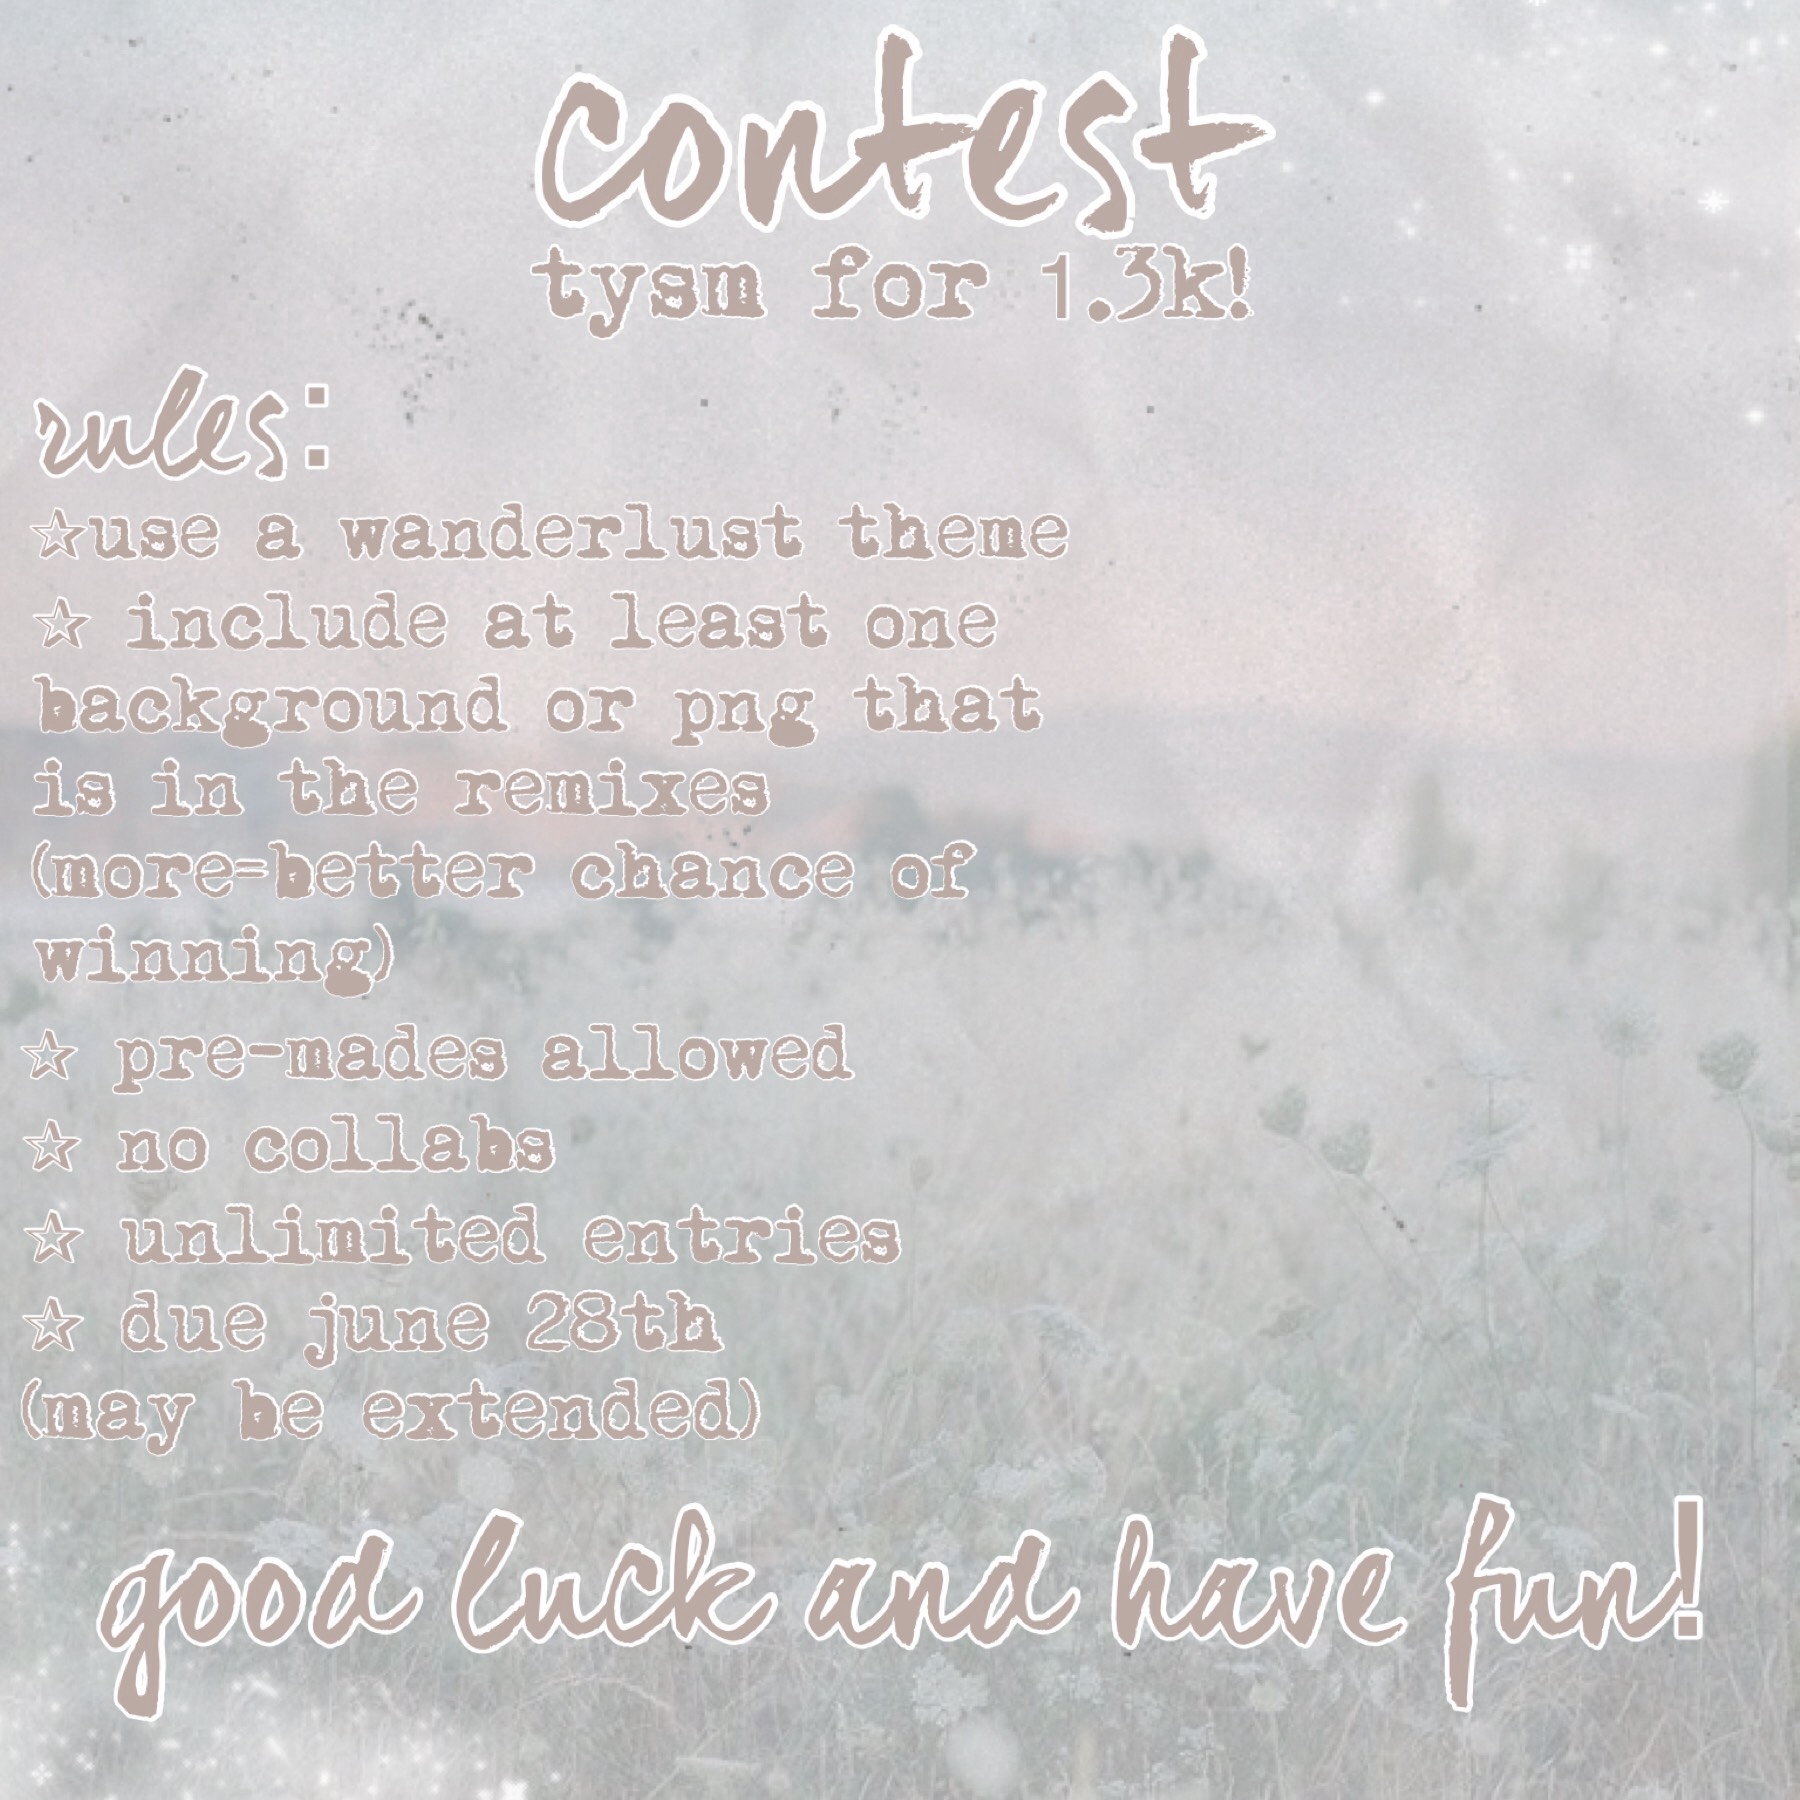 ✰ c o n t e s t ✰
thank again for 1.3k, your support means so much! 
the theme of the contest is wanderlust!
prizes,backgrounds,and pngs are in remixes!